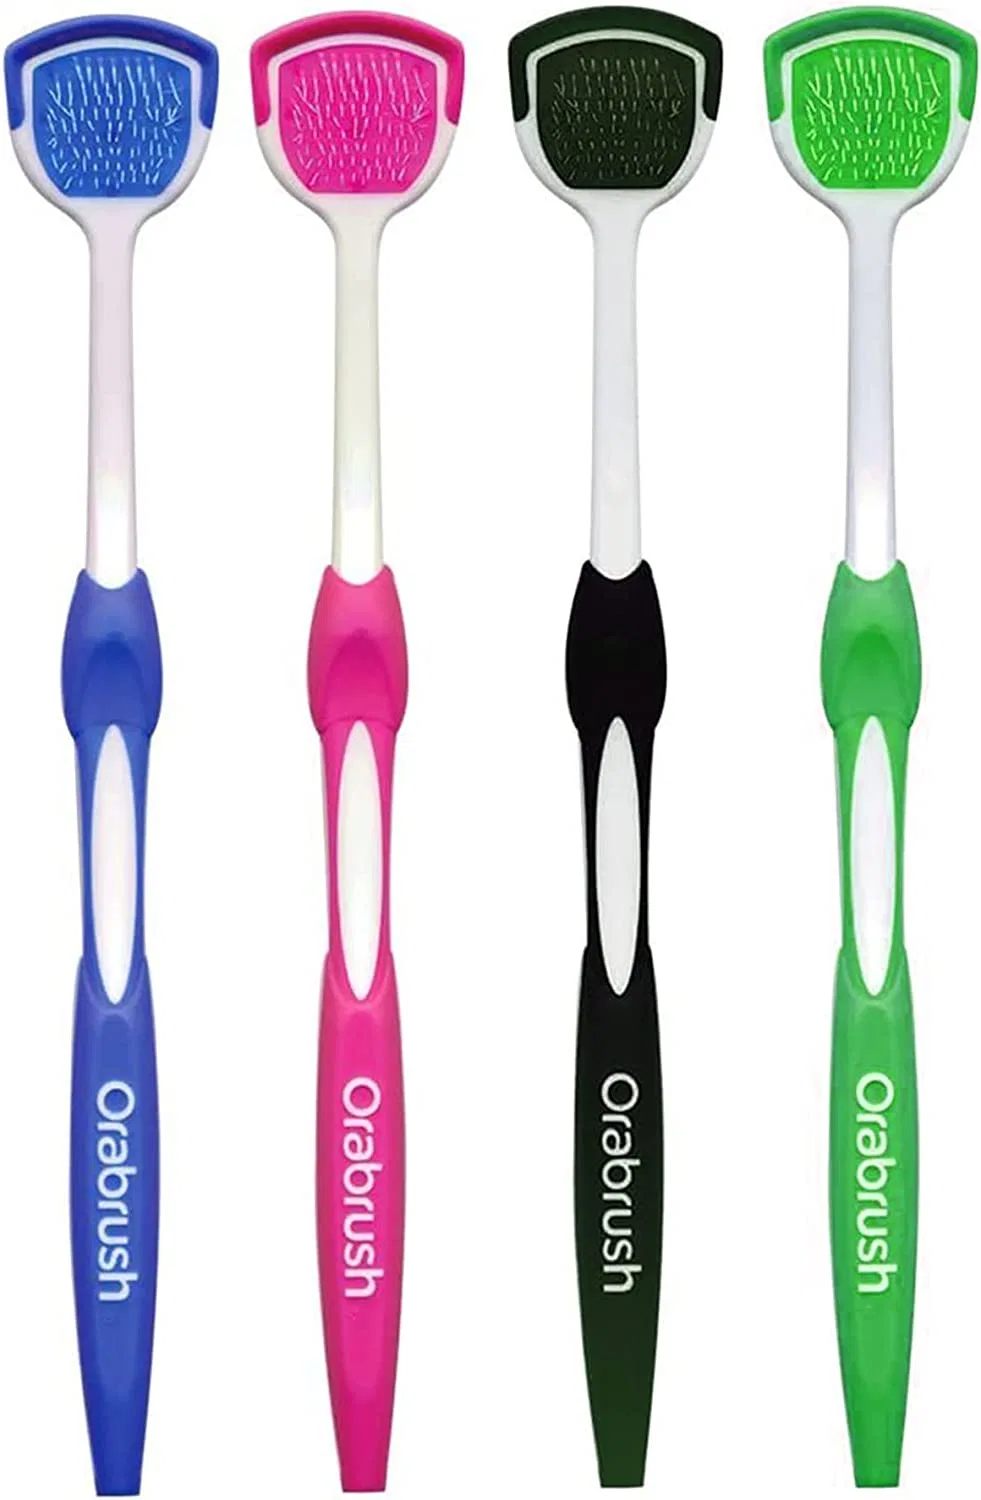 Tongue Scraper, Tongue Cleaner Brushes for Reduce Bad Breath and Maintain Mouth Health